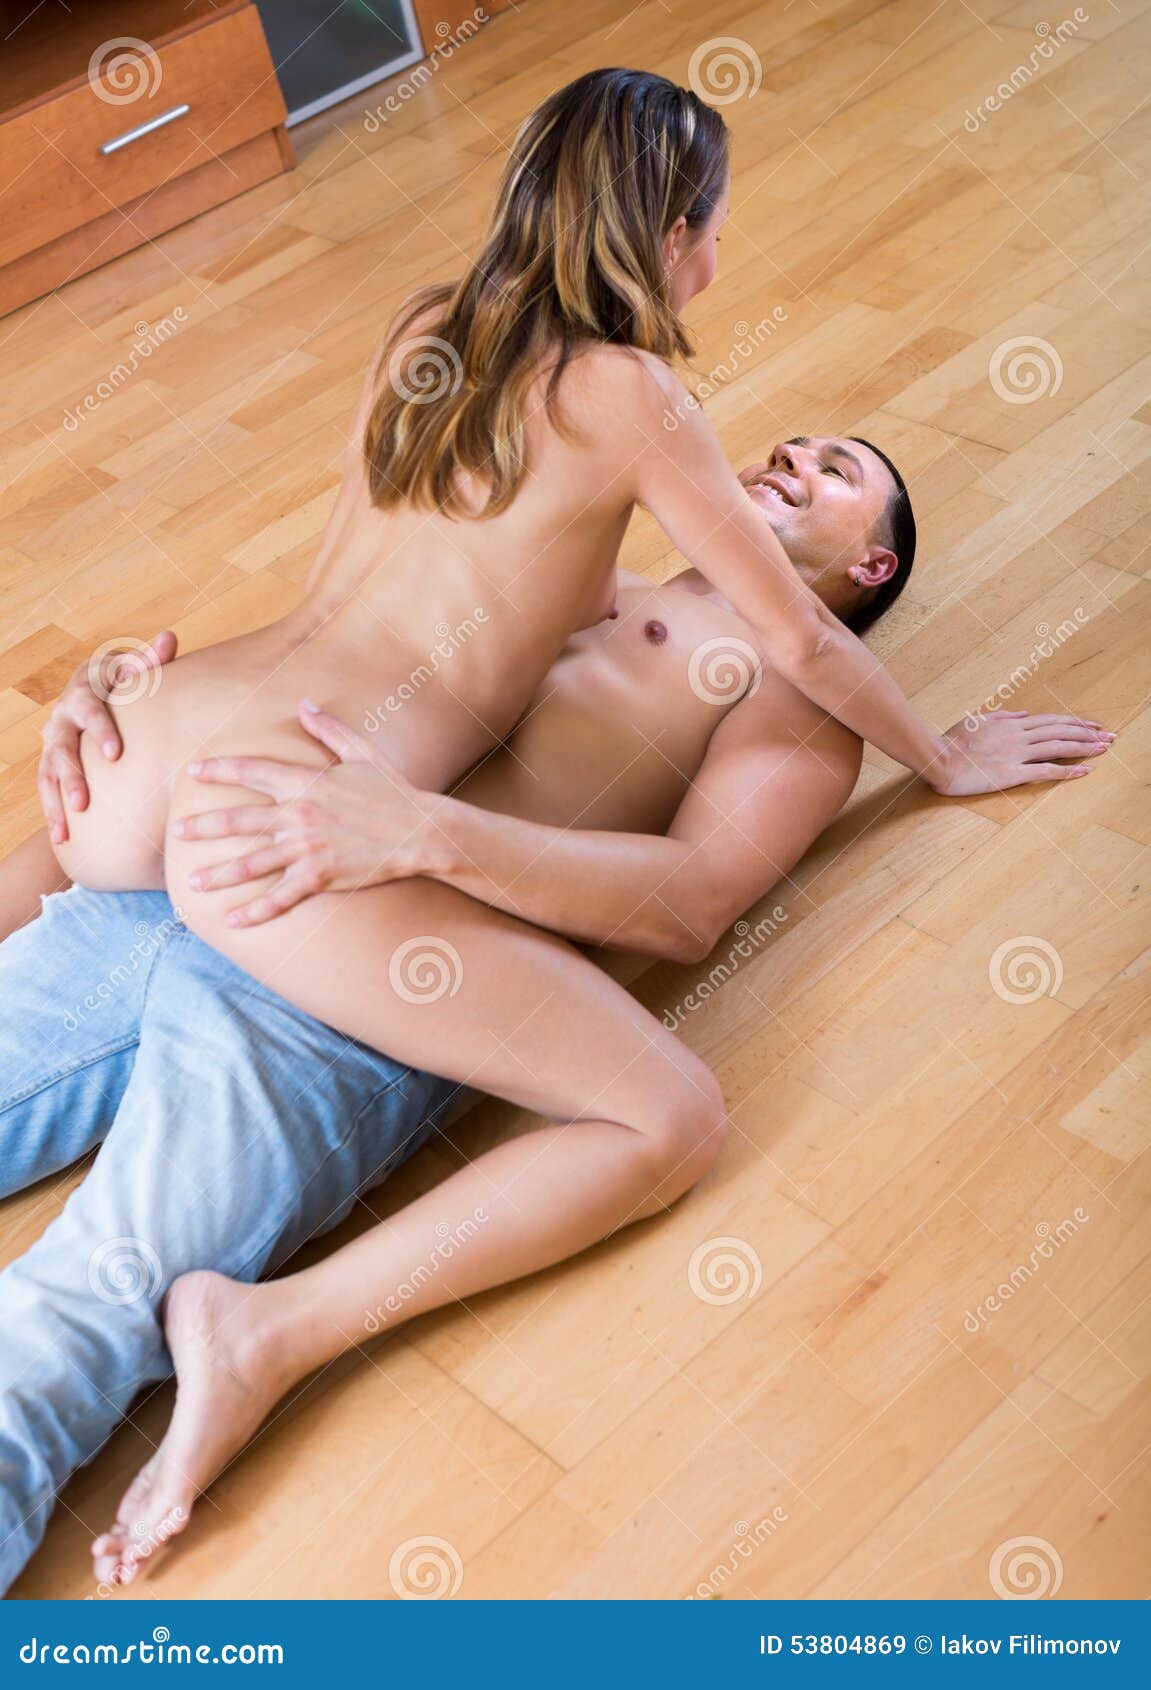 Woman and Man Making Love Indoor Stock Image